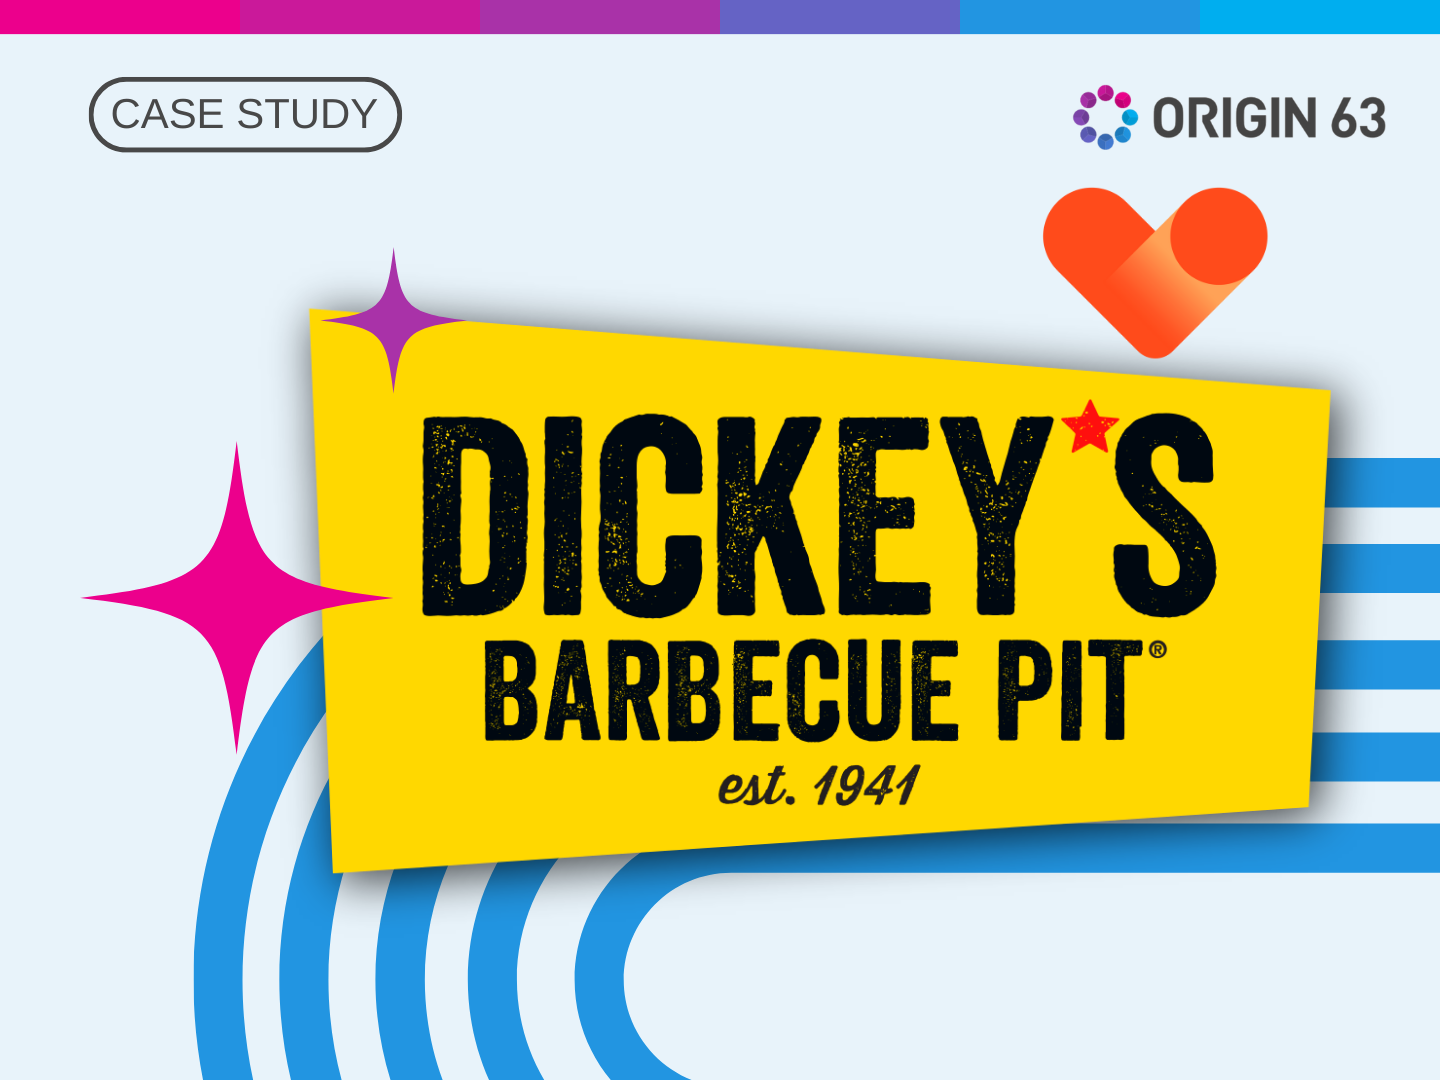 Explore the integrated platform that enables Dickey's to connect with customers efficiently, share information securely, and resolve issues swiftly for an enhanced dining experience